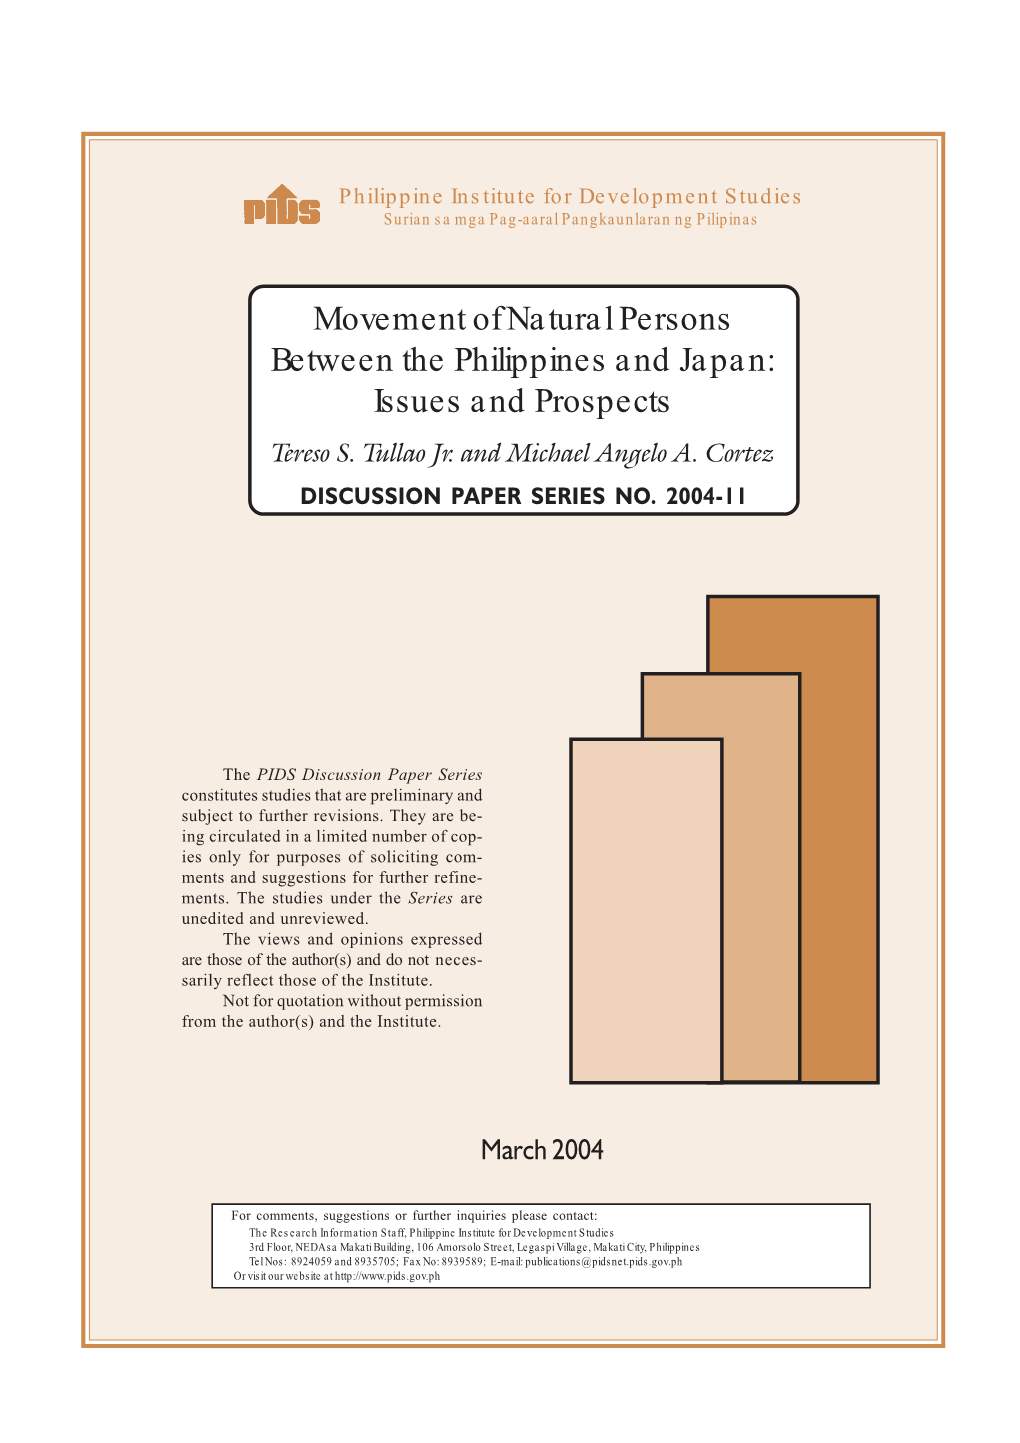 Movement of Natural Persons Between the Philippines and Japan: Issues and Prospects Tereso S